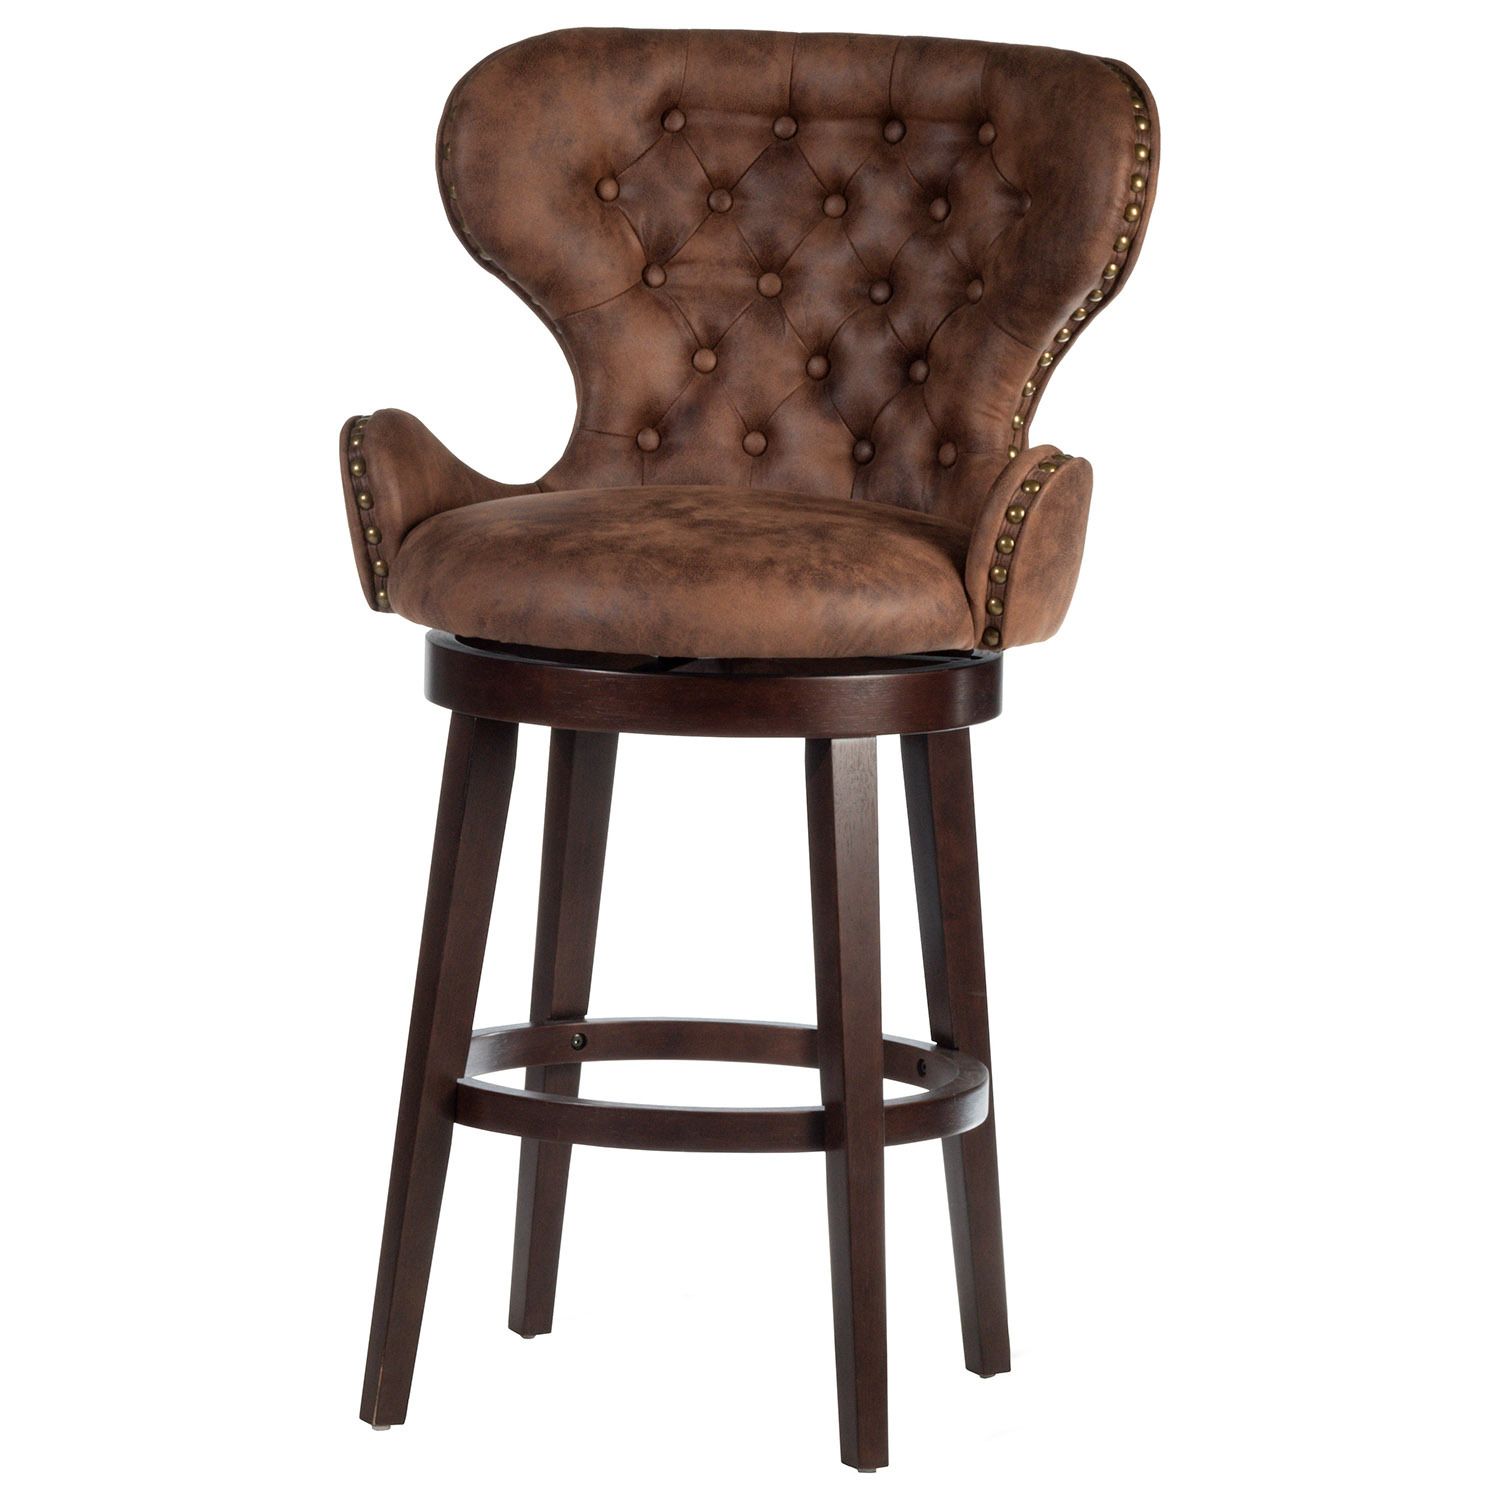 Image for Hillsdale Furniture Mid-City Swivel Bar Stool at Kohl's.